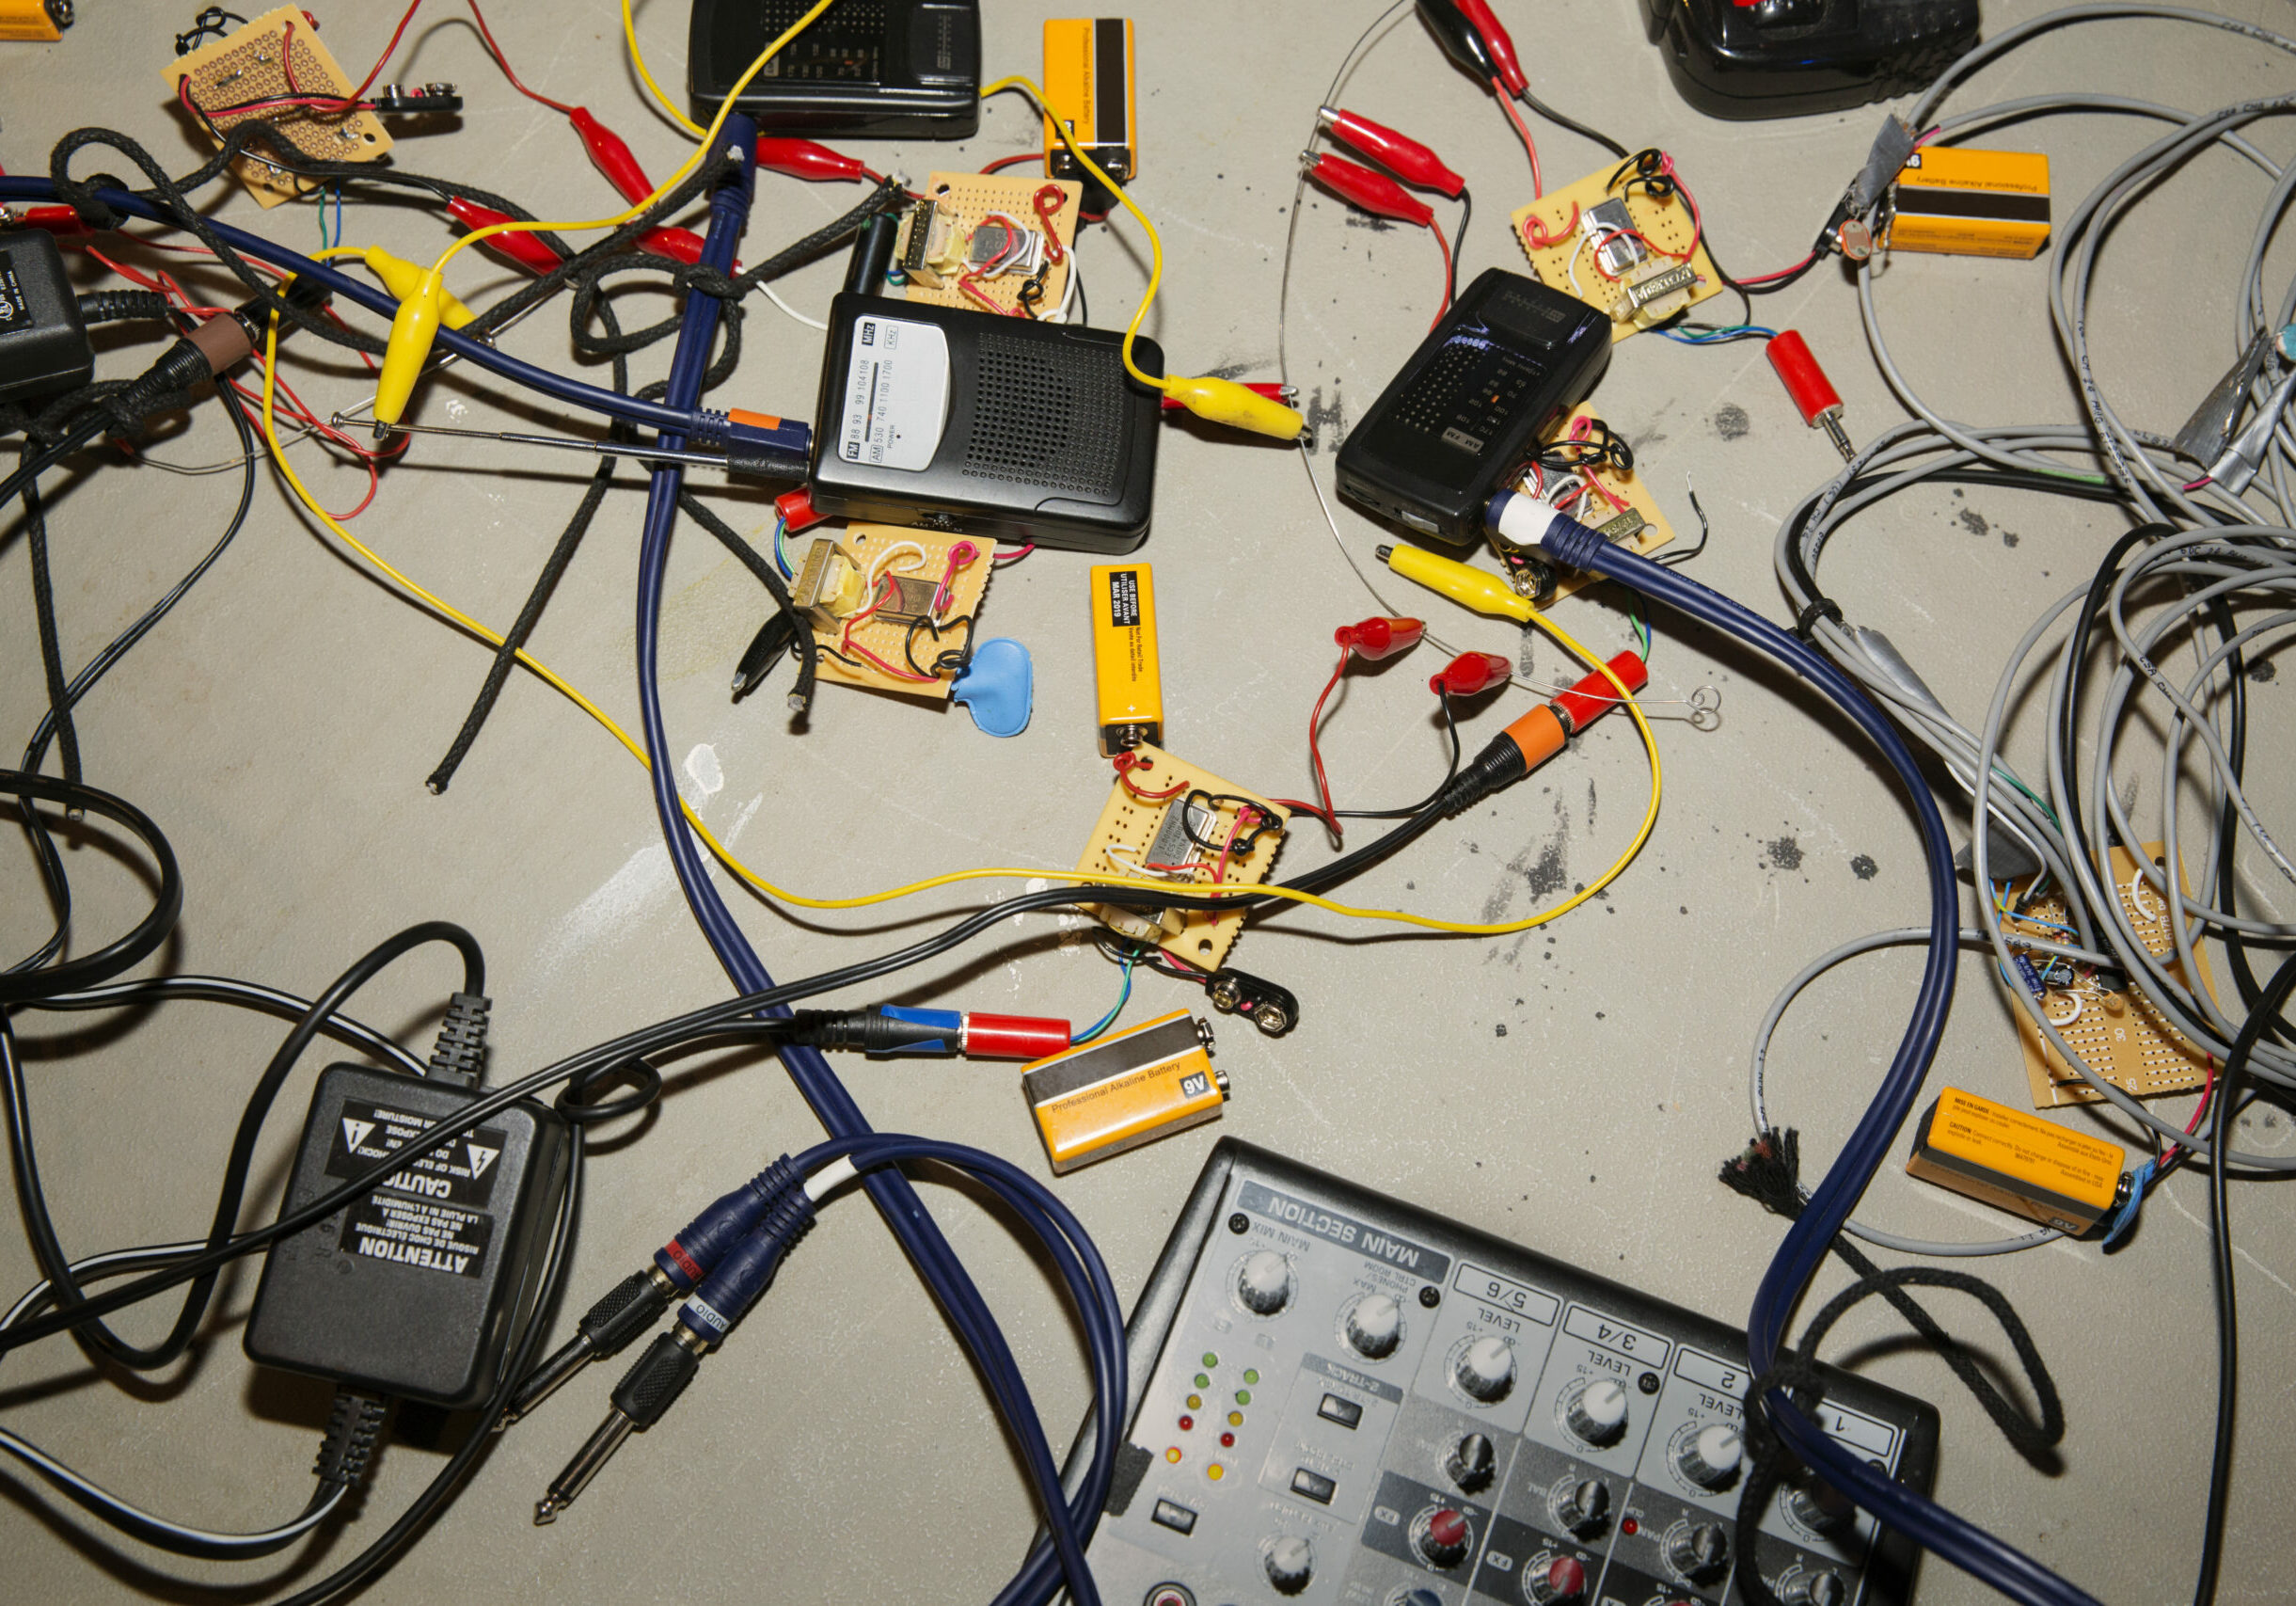 Overhead View Of Electrical Equipment On Floor